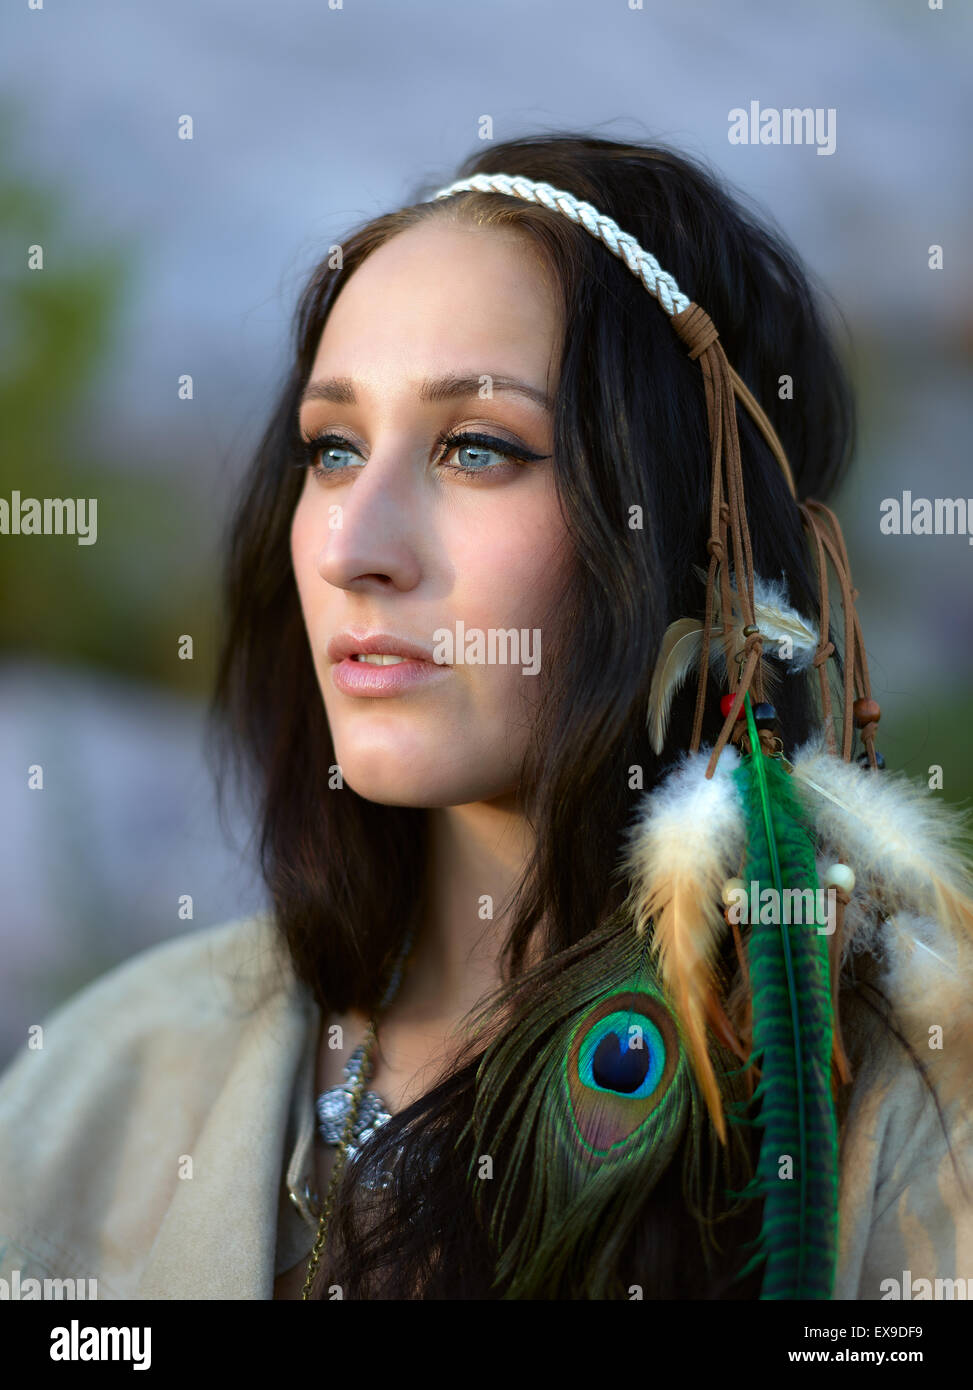 Attractive young woman wearing a feather headpiece, summer evening Stock Photo